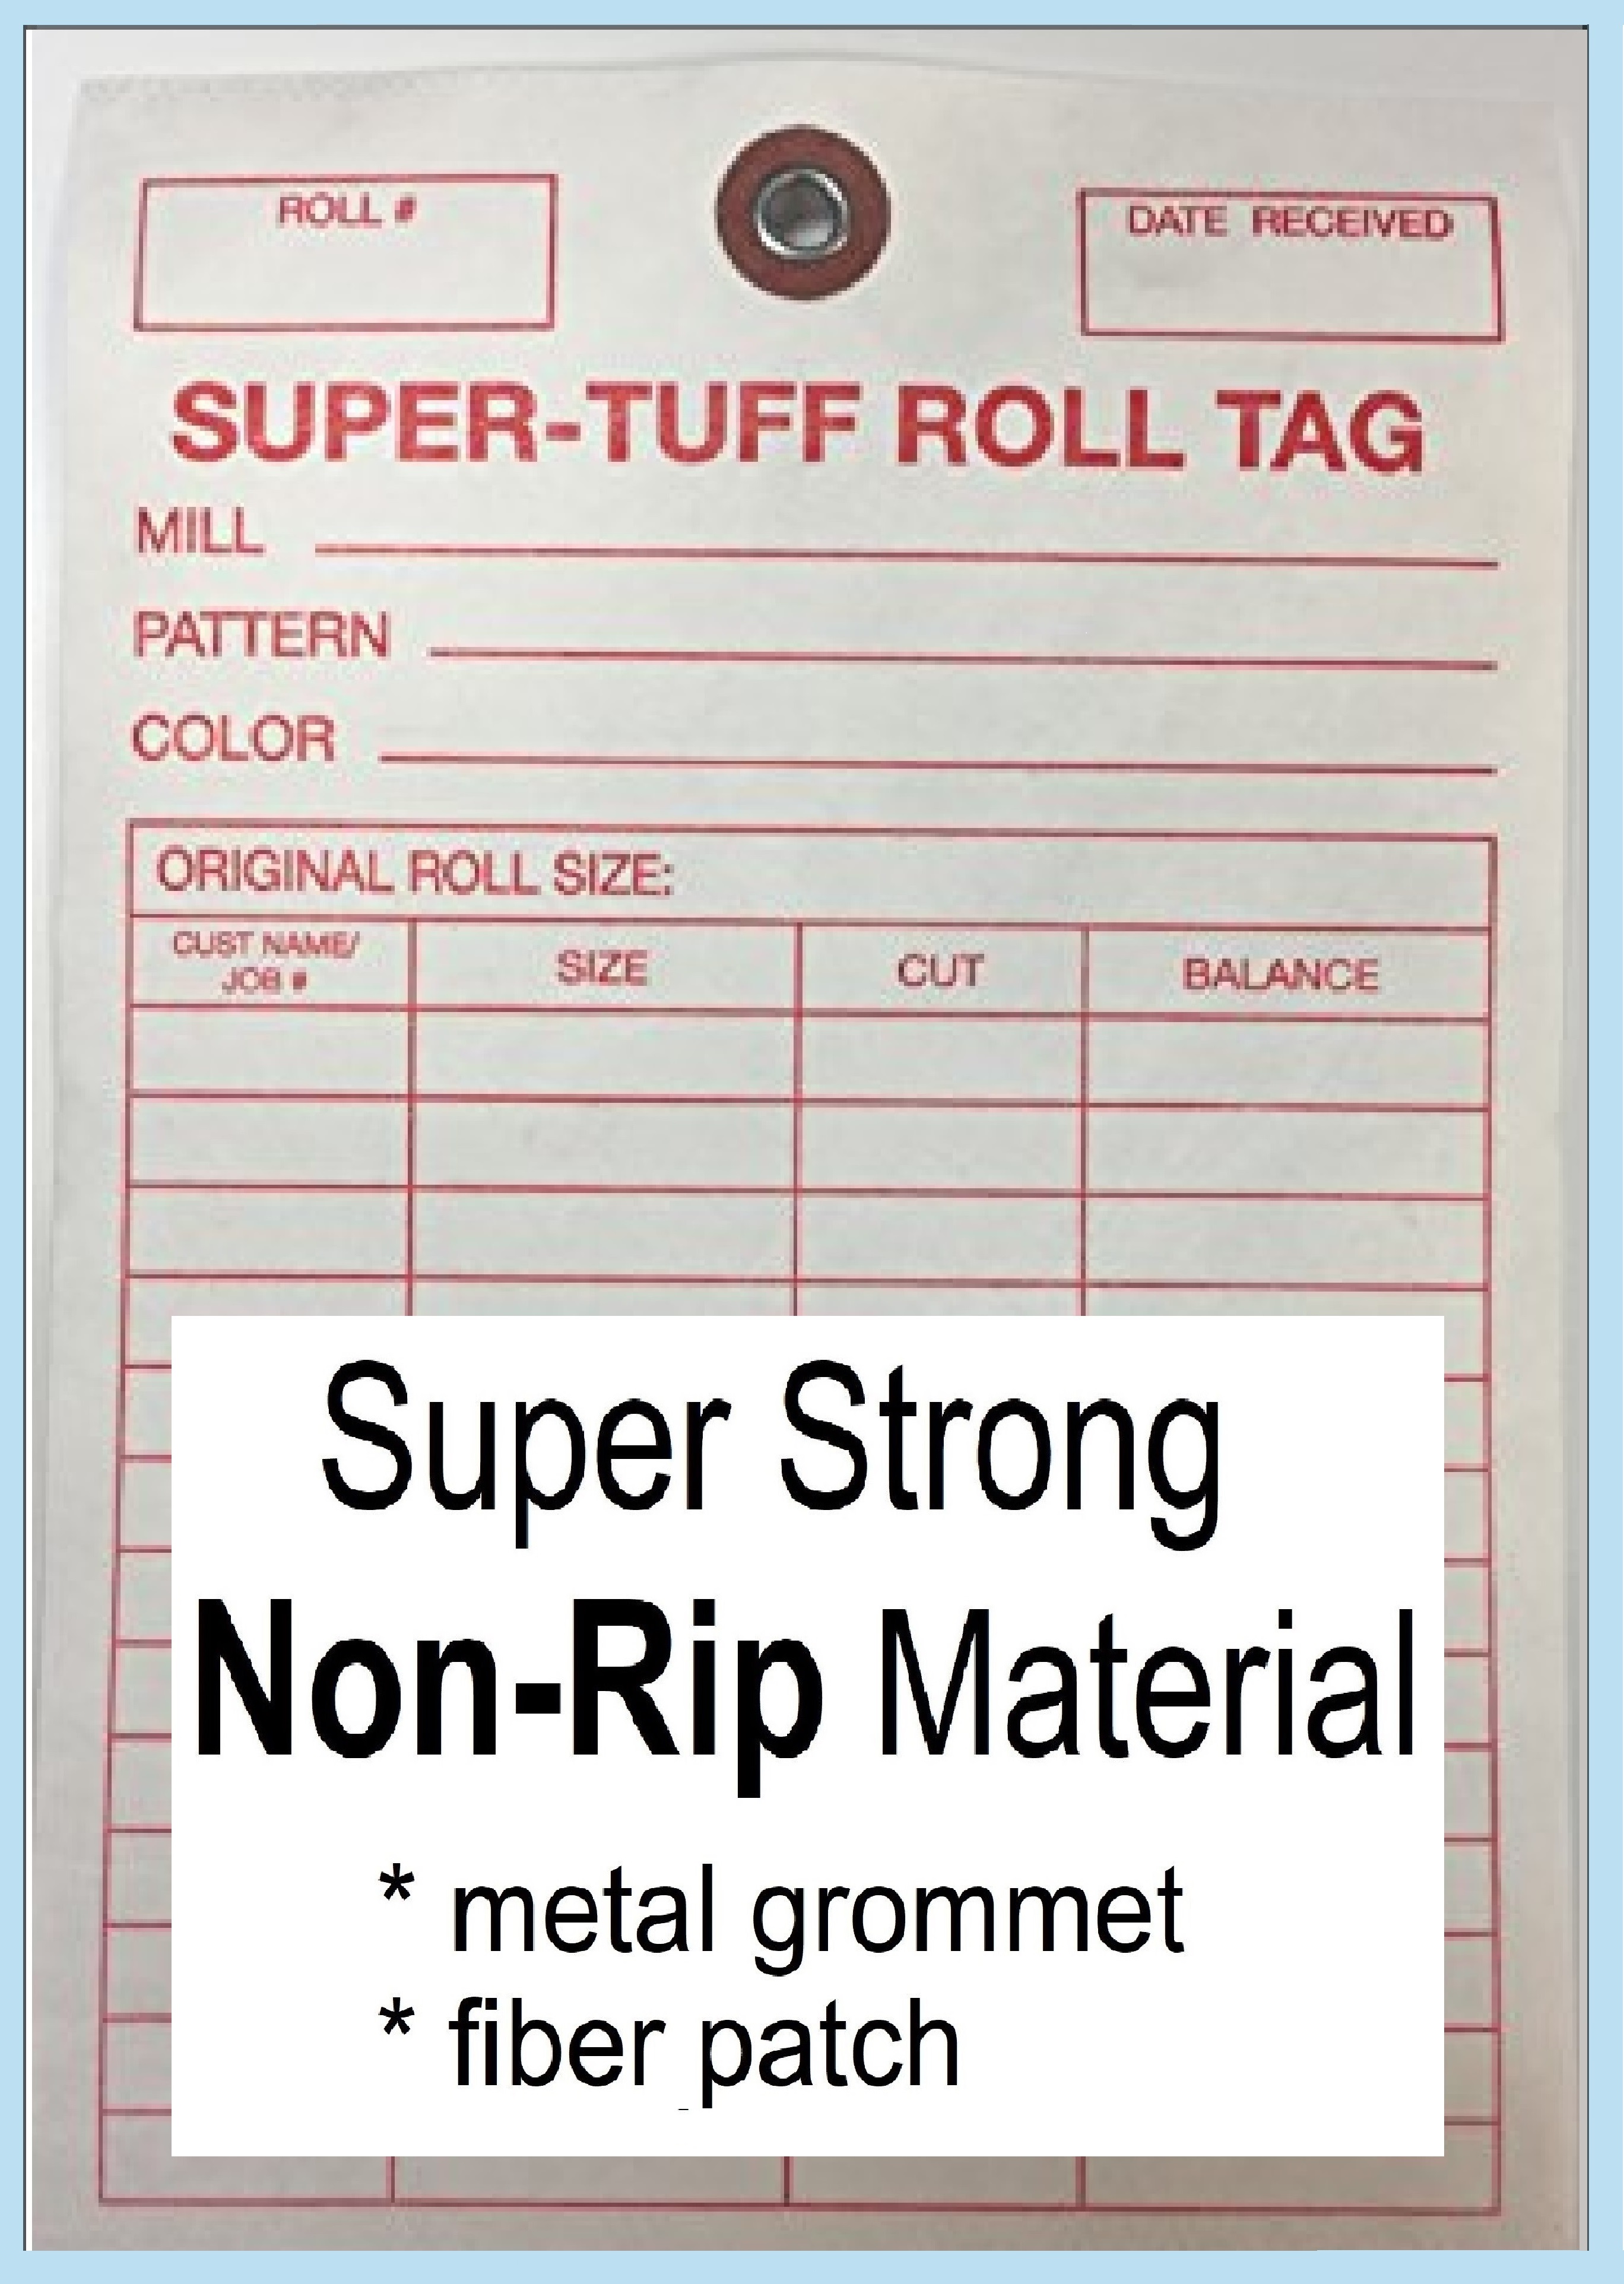 TTUFF1 Super Tuff Roll tags for Tracking Carpet Inventory 5 inch x 7 inch